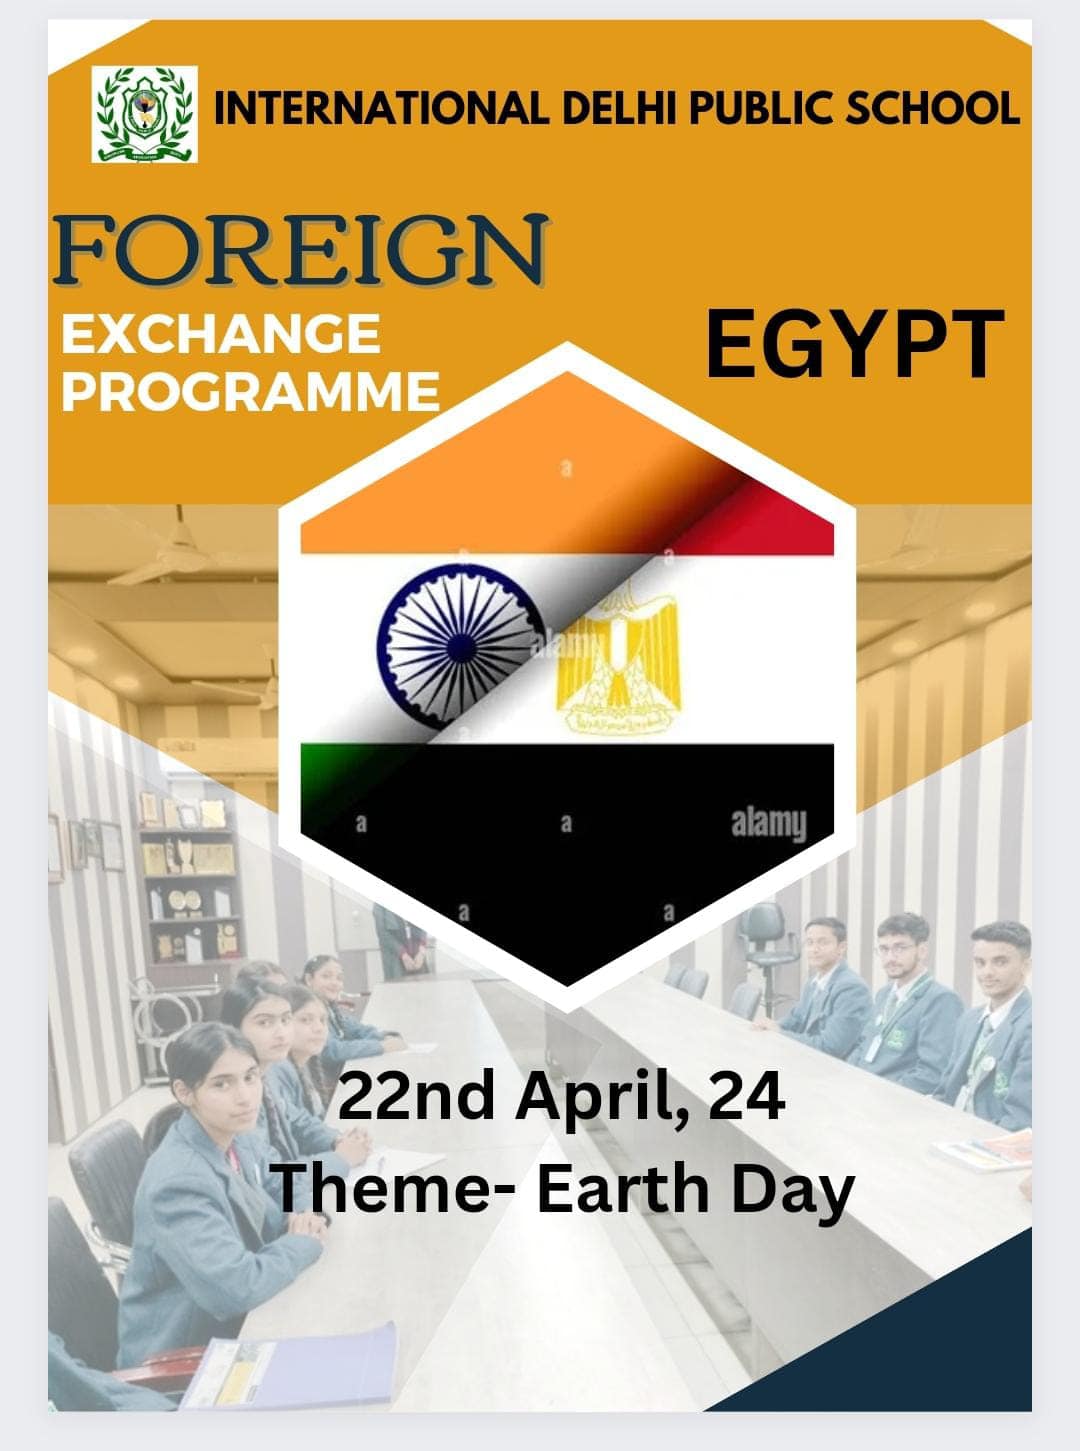 Virtual Foreign Exchange Programme with Egypt